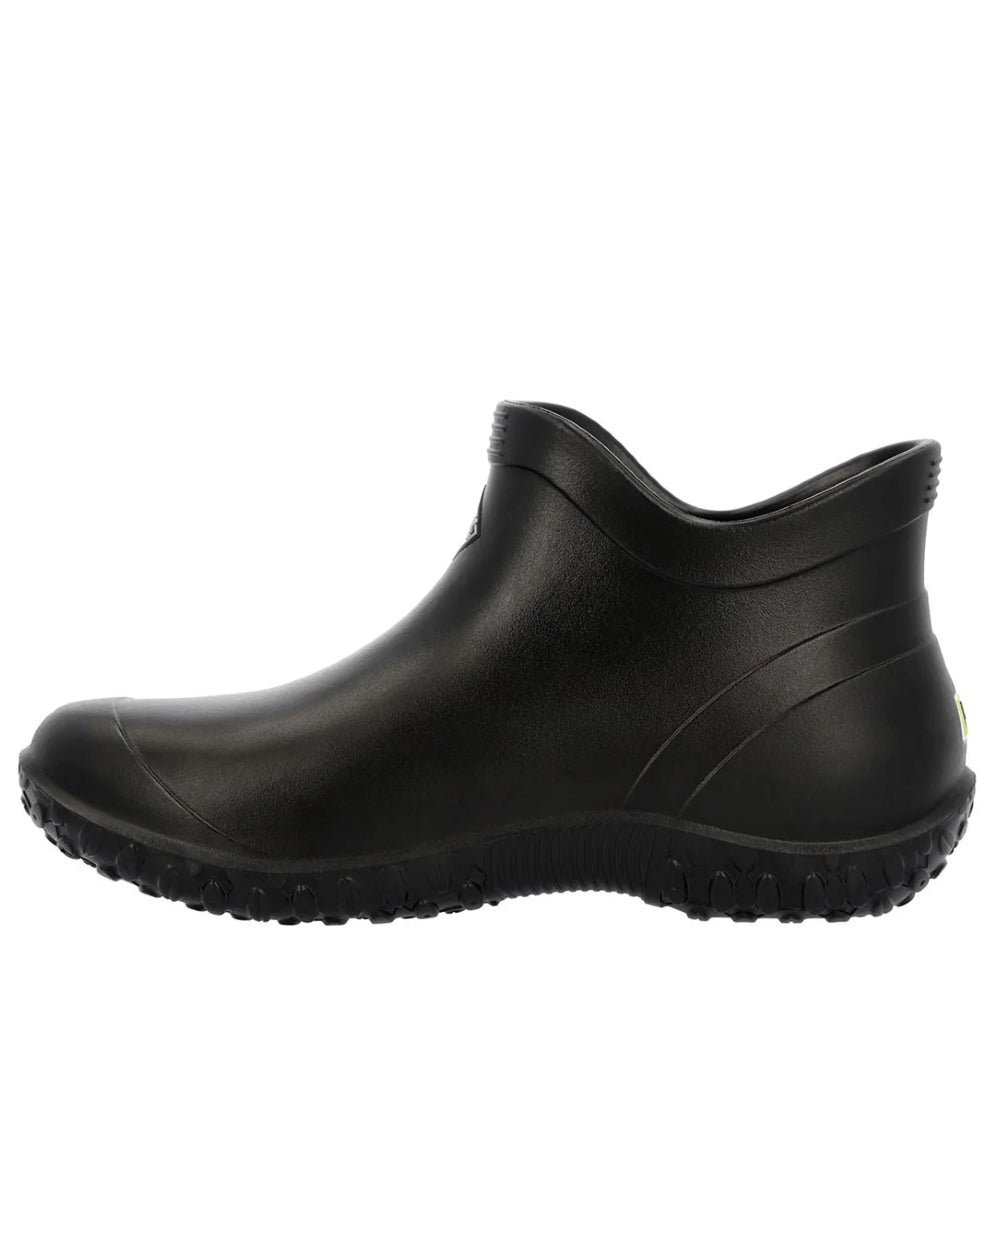 Black Coloured Muck Boots Womens Muckster Lite Ankle Boots On A White Background 